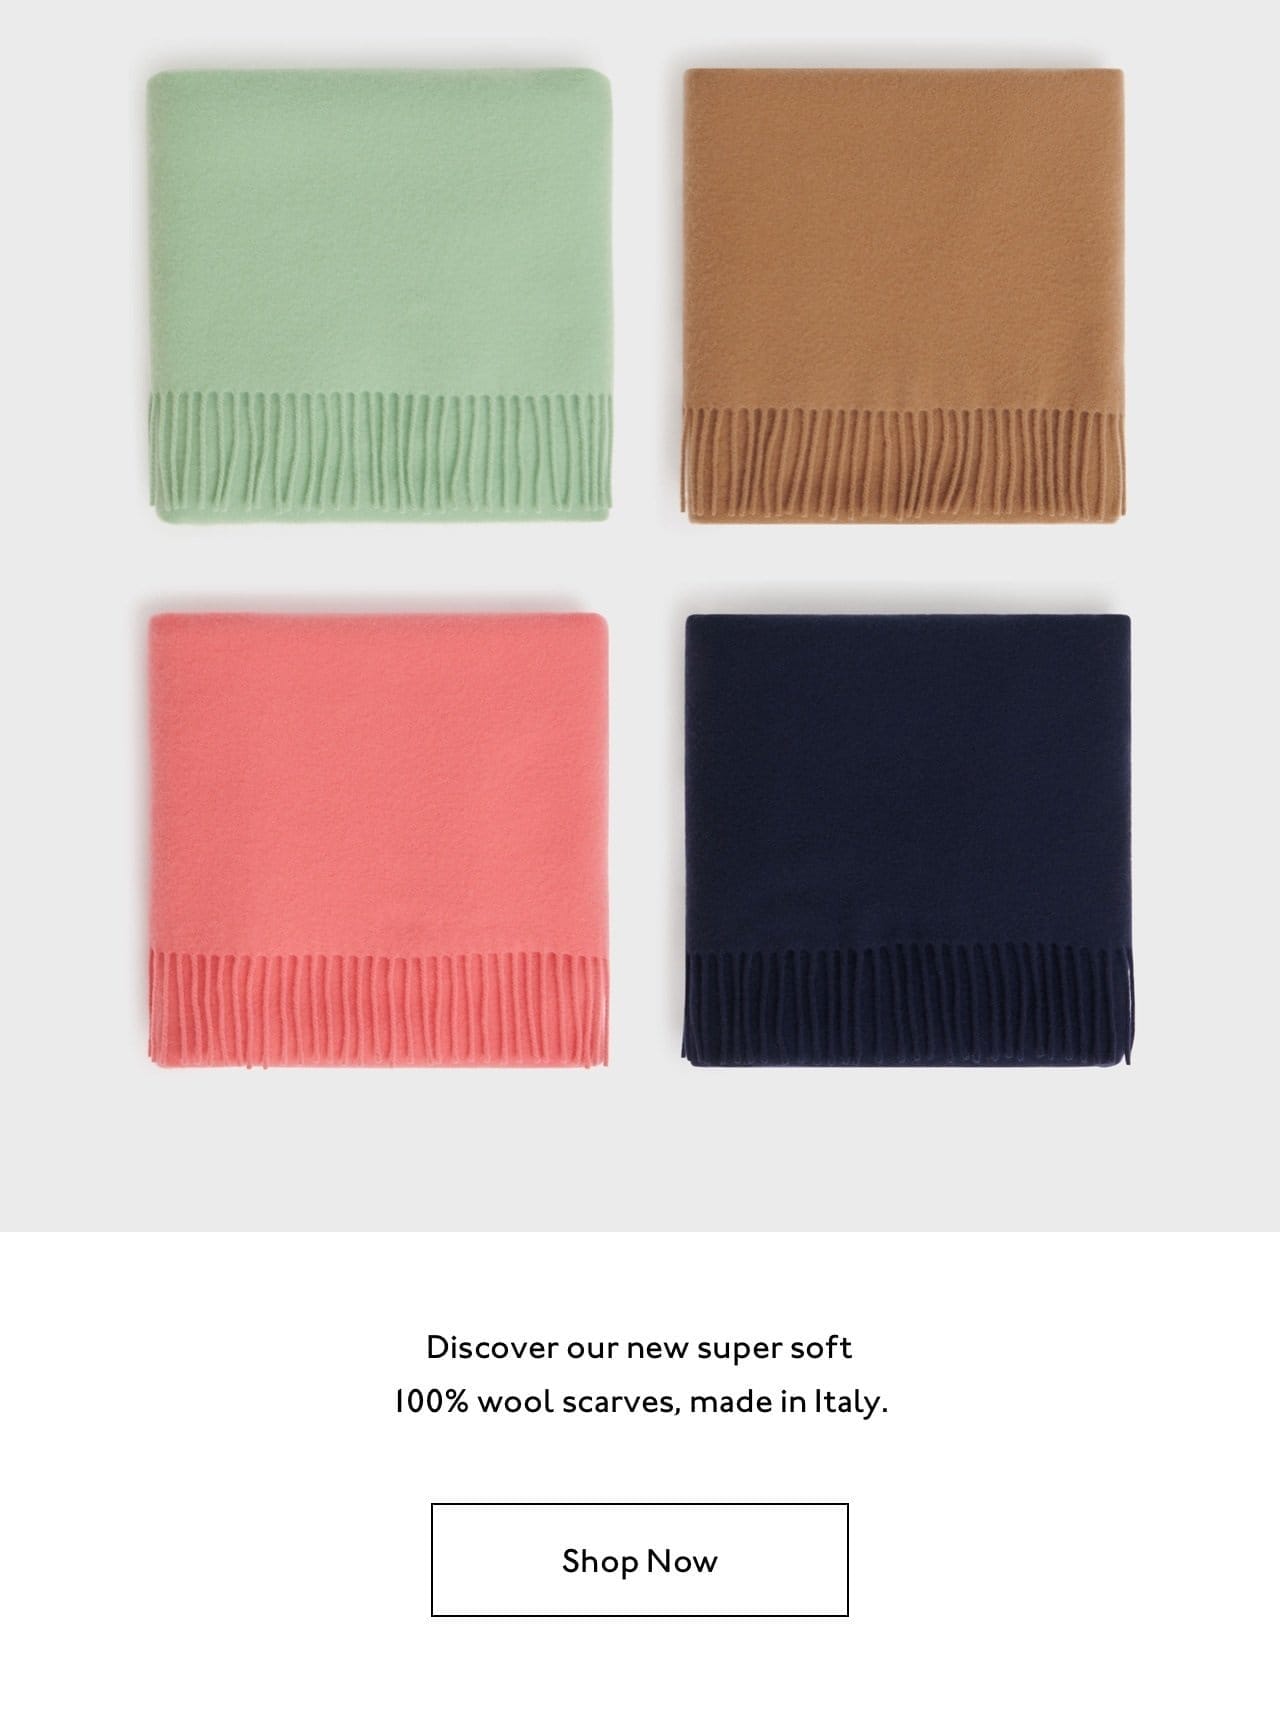 Discover our new super soft 100% wool scarves, made in Italy.